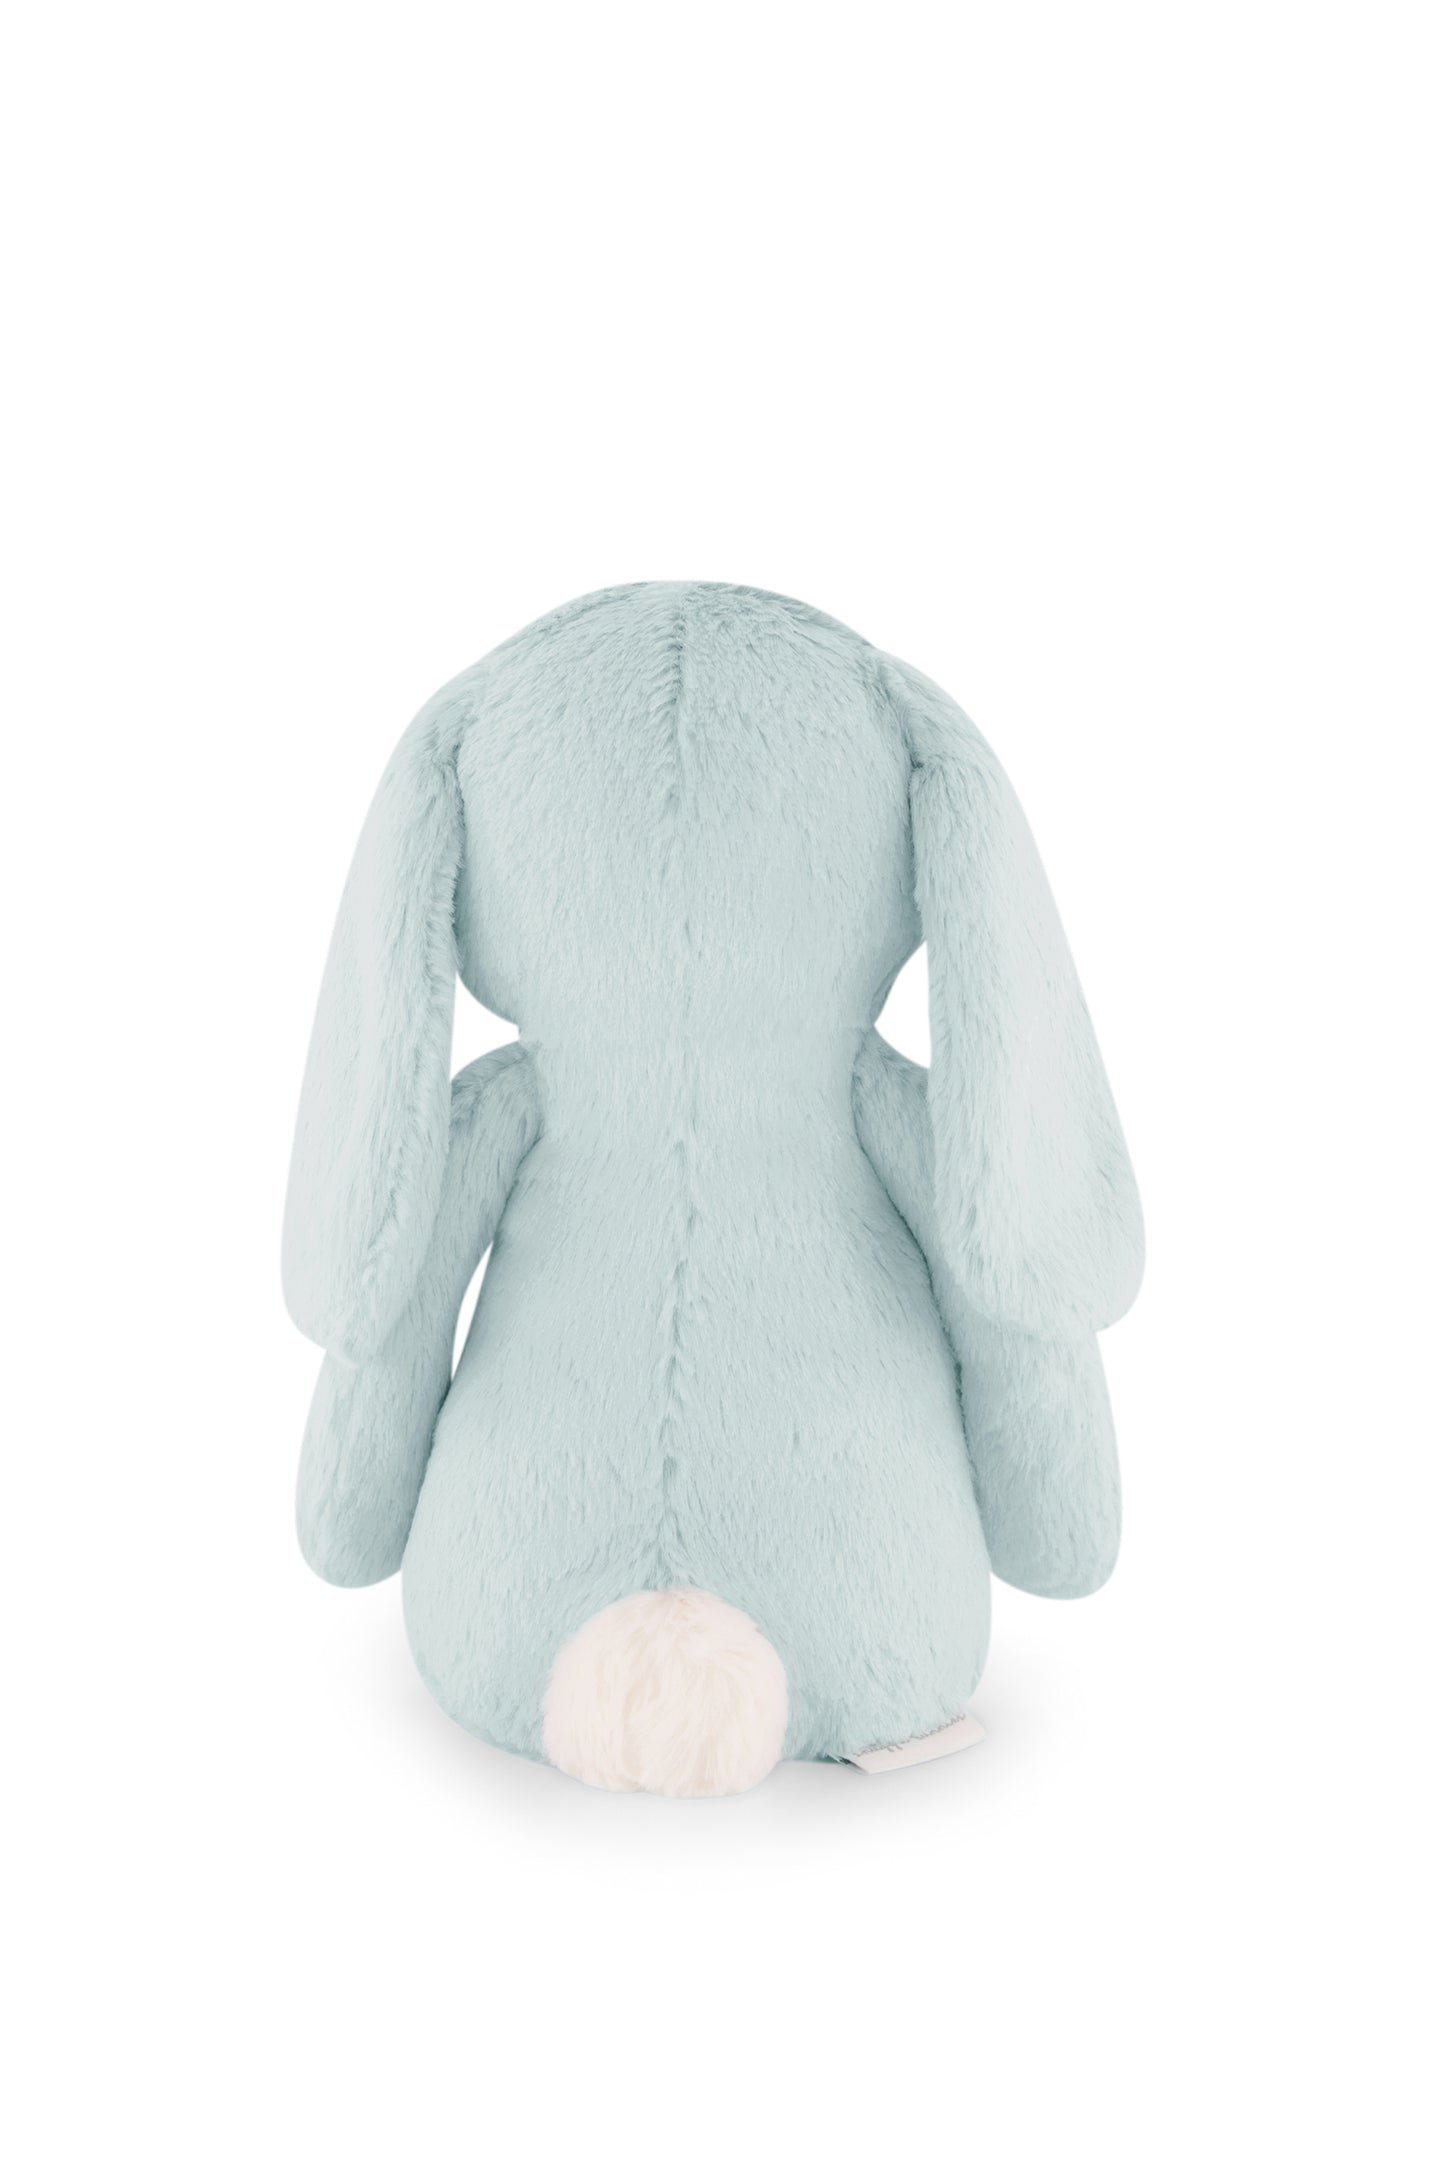 Jamie Kay Snuggle Bunnies 30cm Penelope The Bunny Sprout